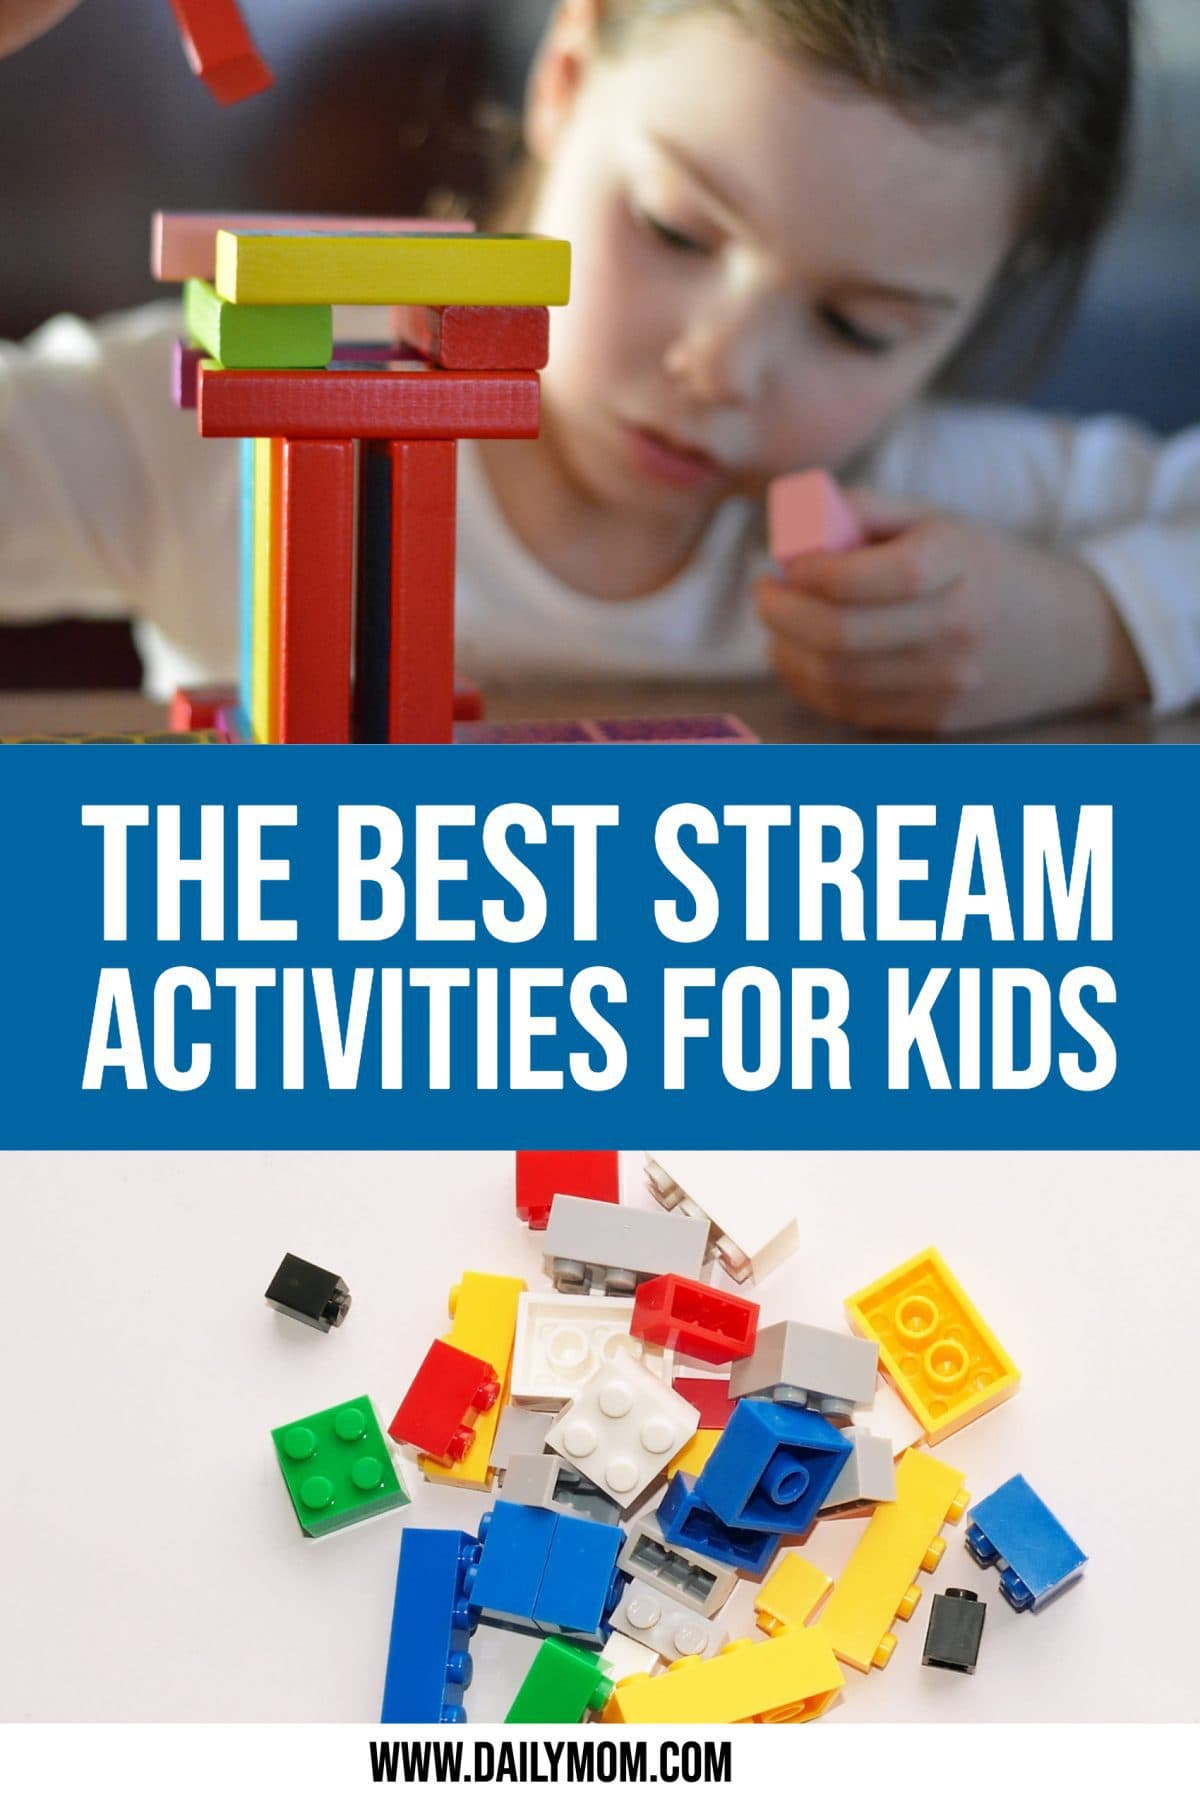 The 10 Best Stream Toys For Your Kids {2019}